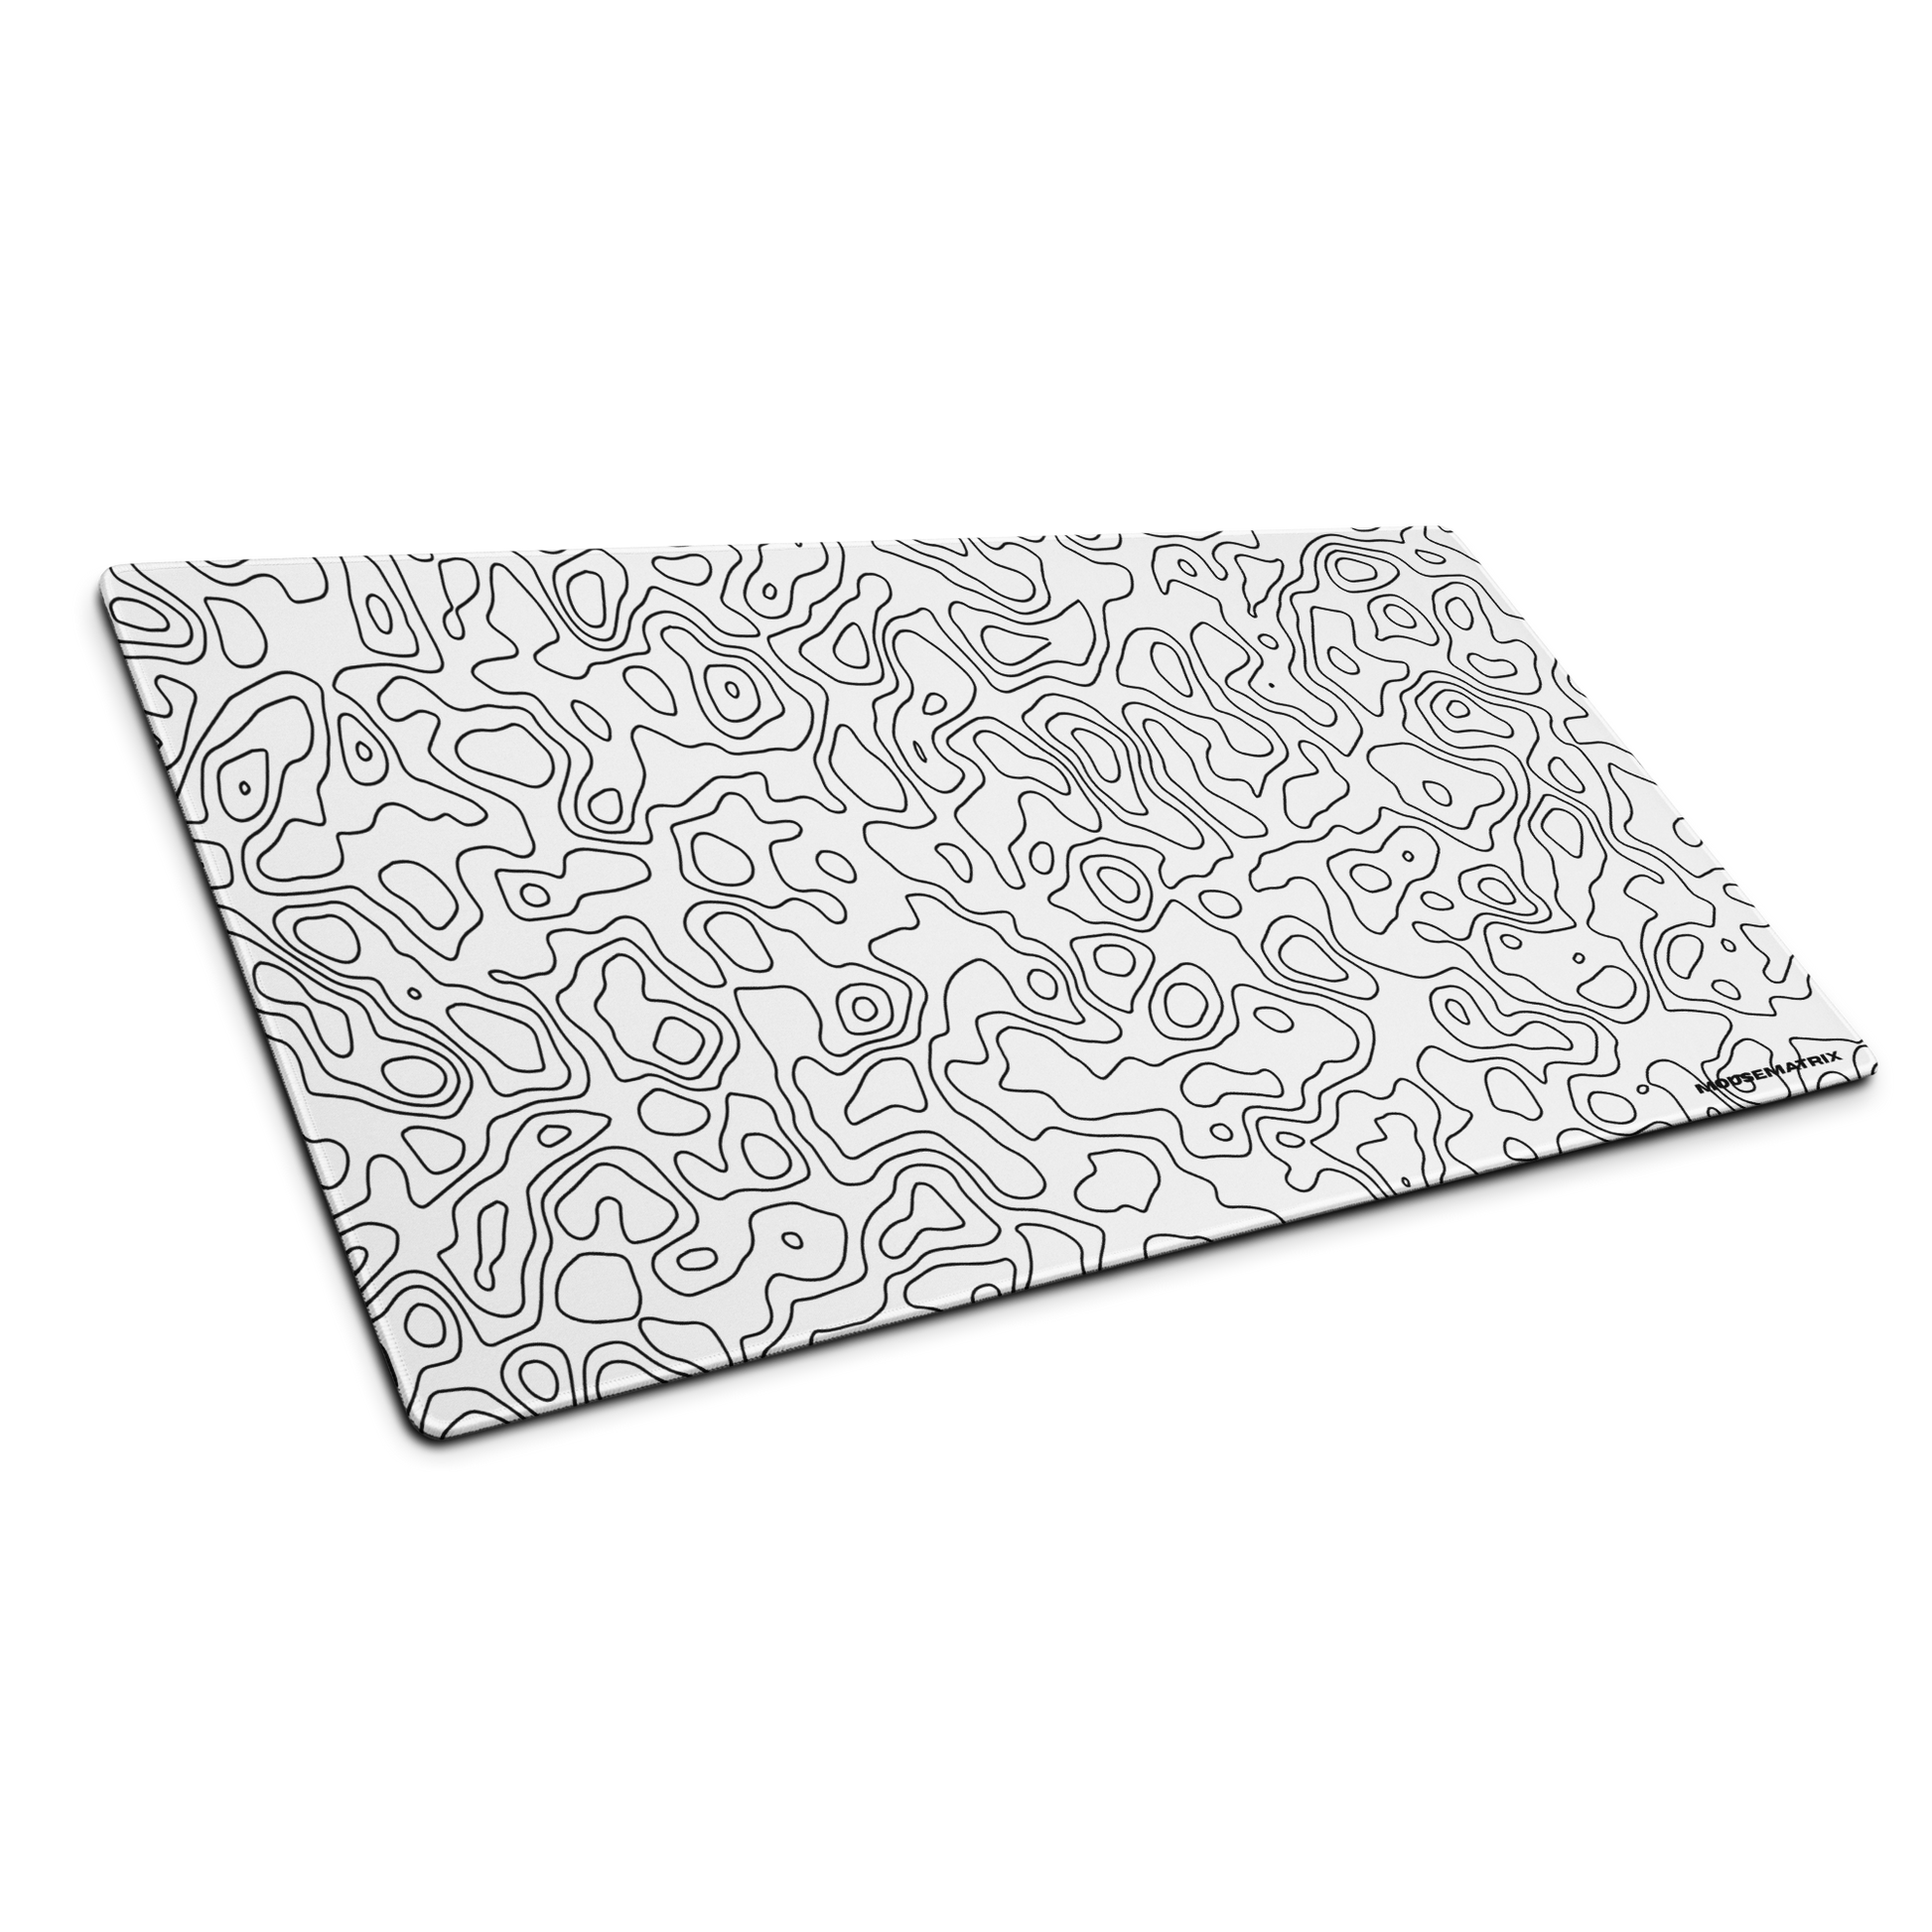 White Plain Mouse Pad at Rs 75/piece in Thane